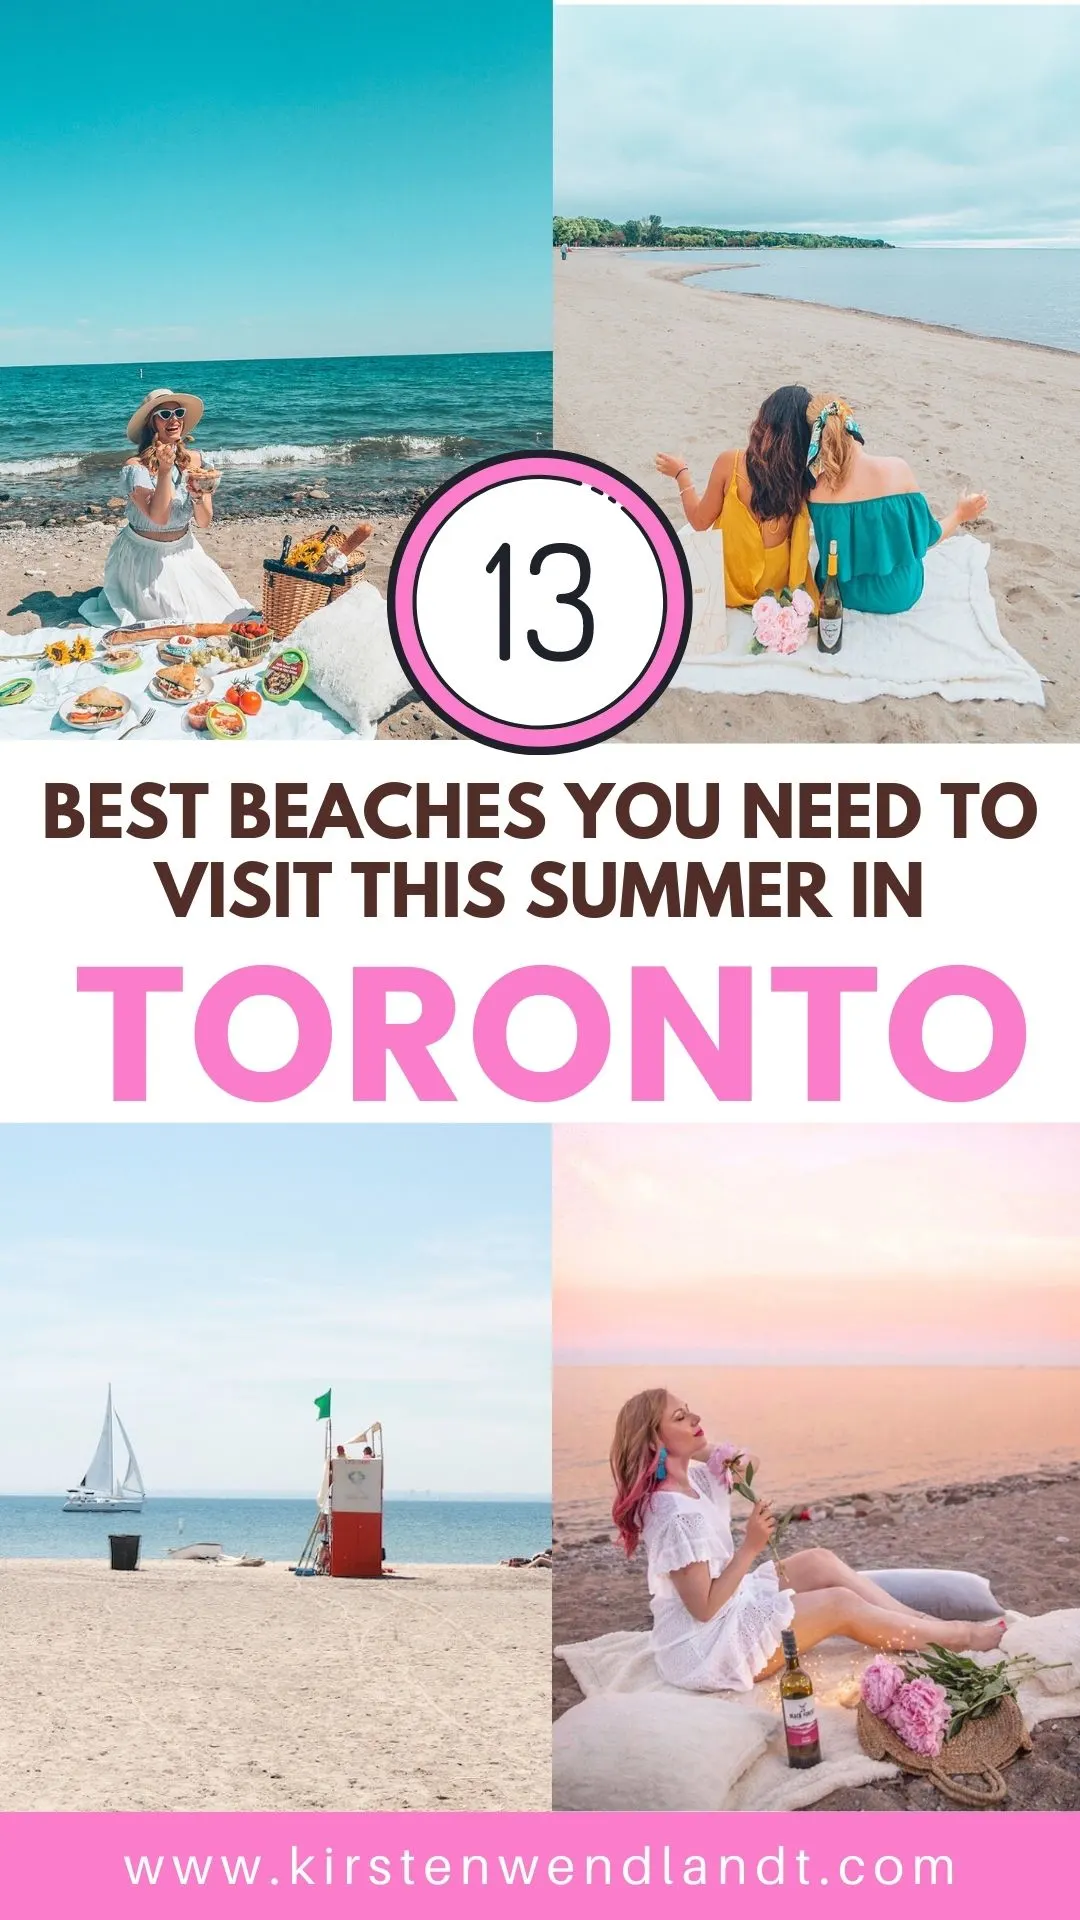 Looking for a great beach to spend a hot summer day laying in the sun on? This guide to the best beaches in Toronto is for you! Whether you're looking for a relaxing and quiet beach hang, the perfect beach for a family picnic, or want to enjoy the beach life in a more lively environment, there is Toronto beach for you.